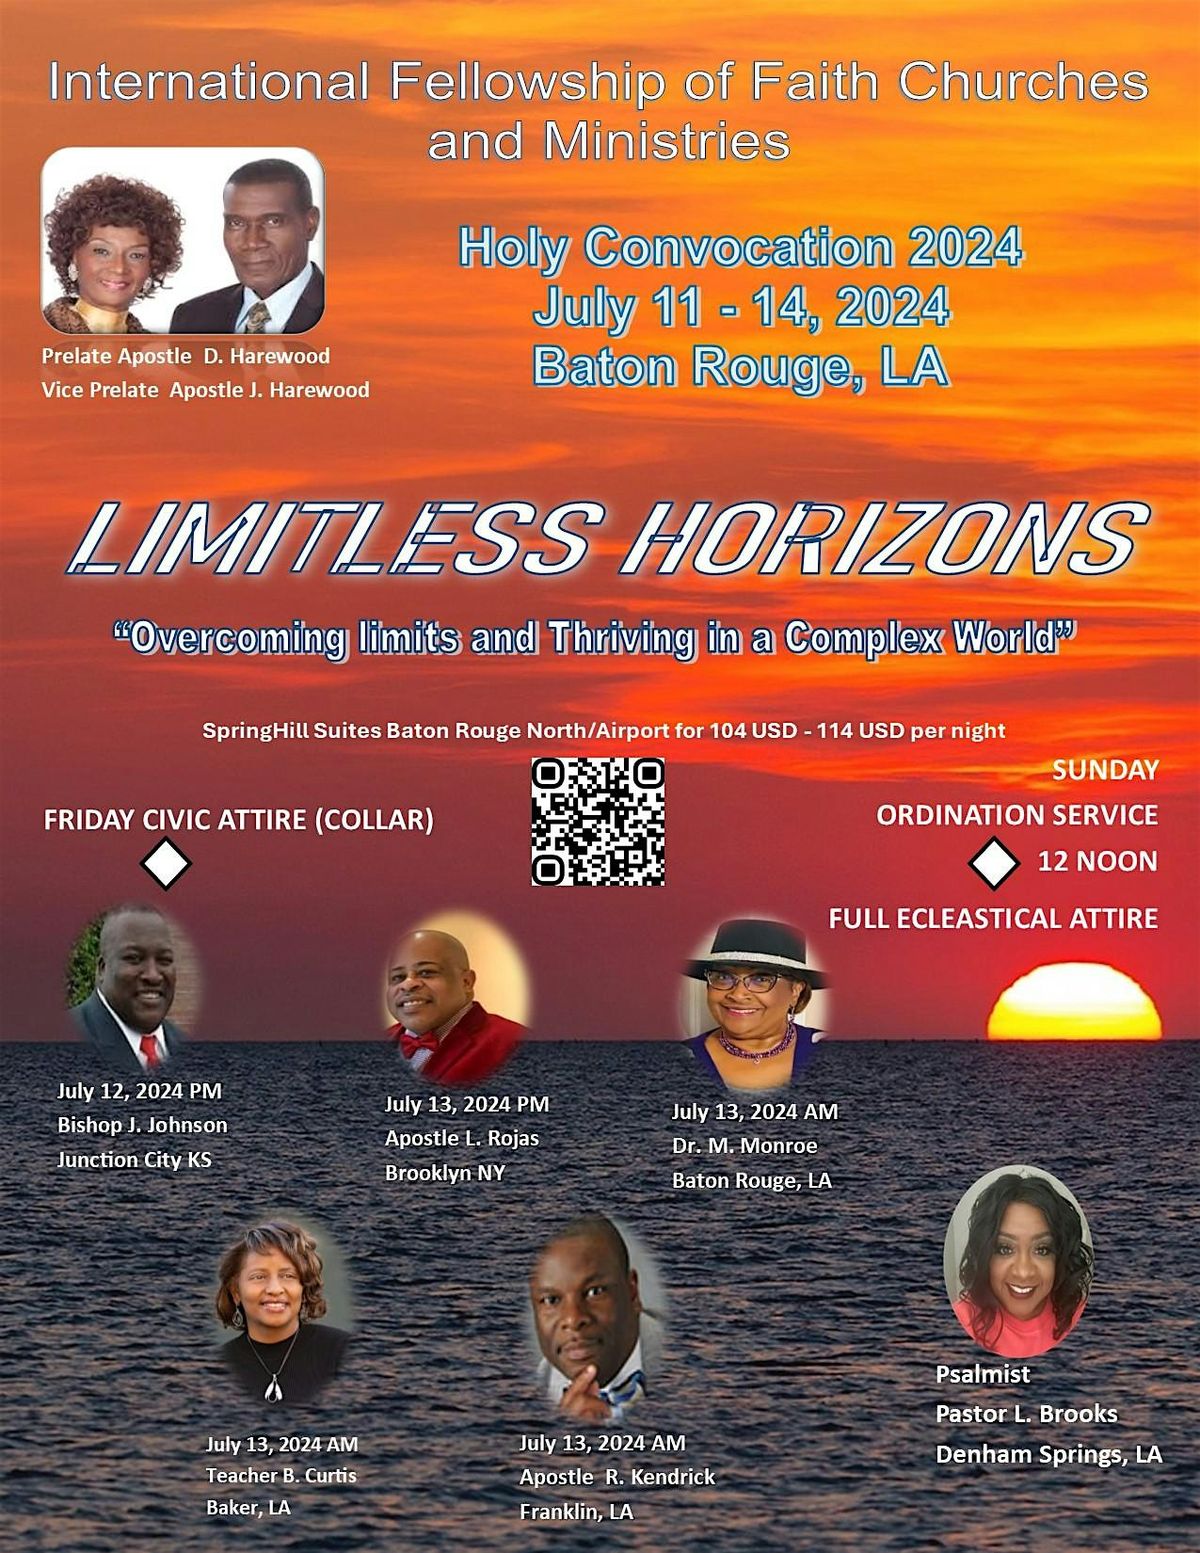 IFFCM 2024 HOLY CONVOCATION "LIMITLESS HORIZON"